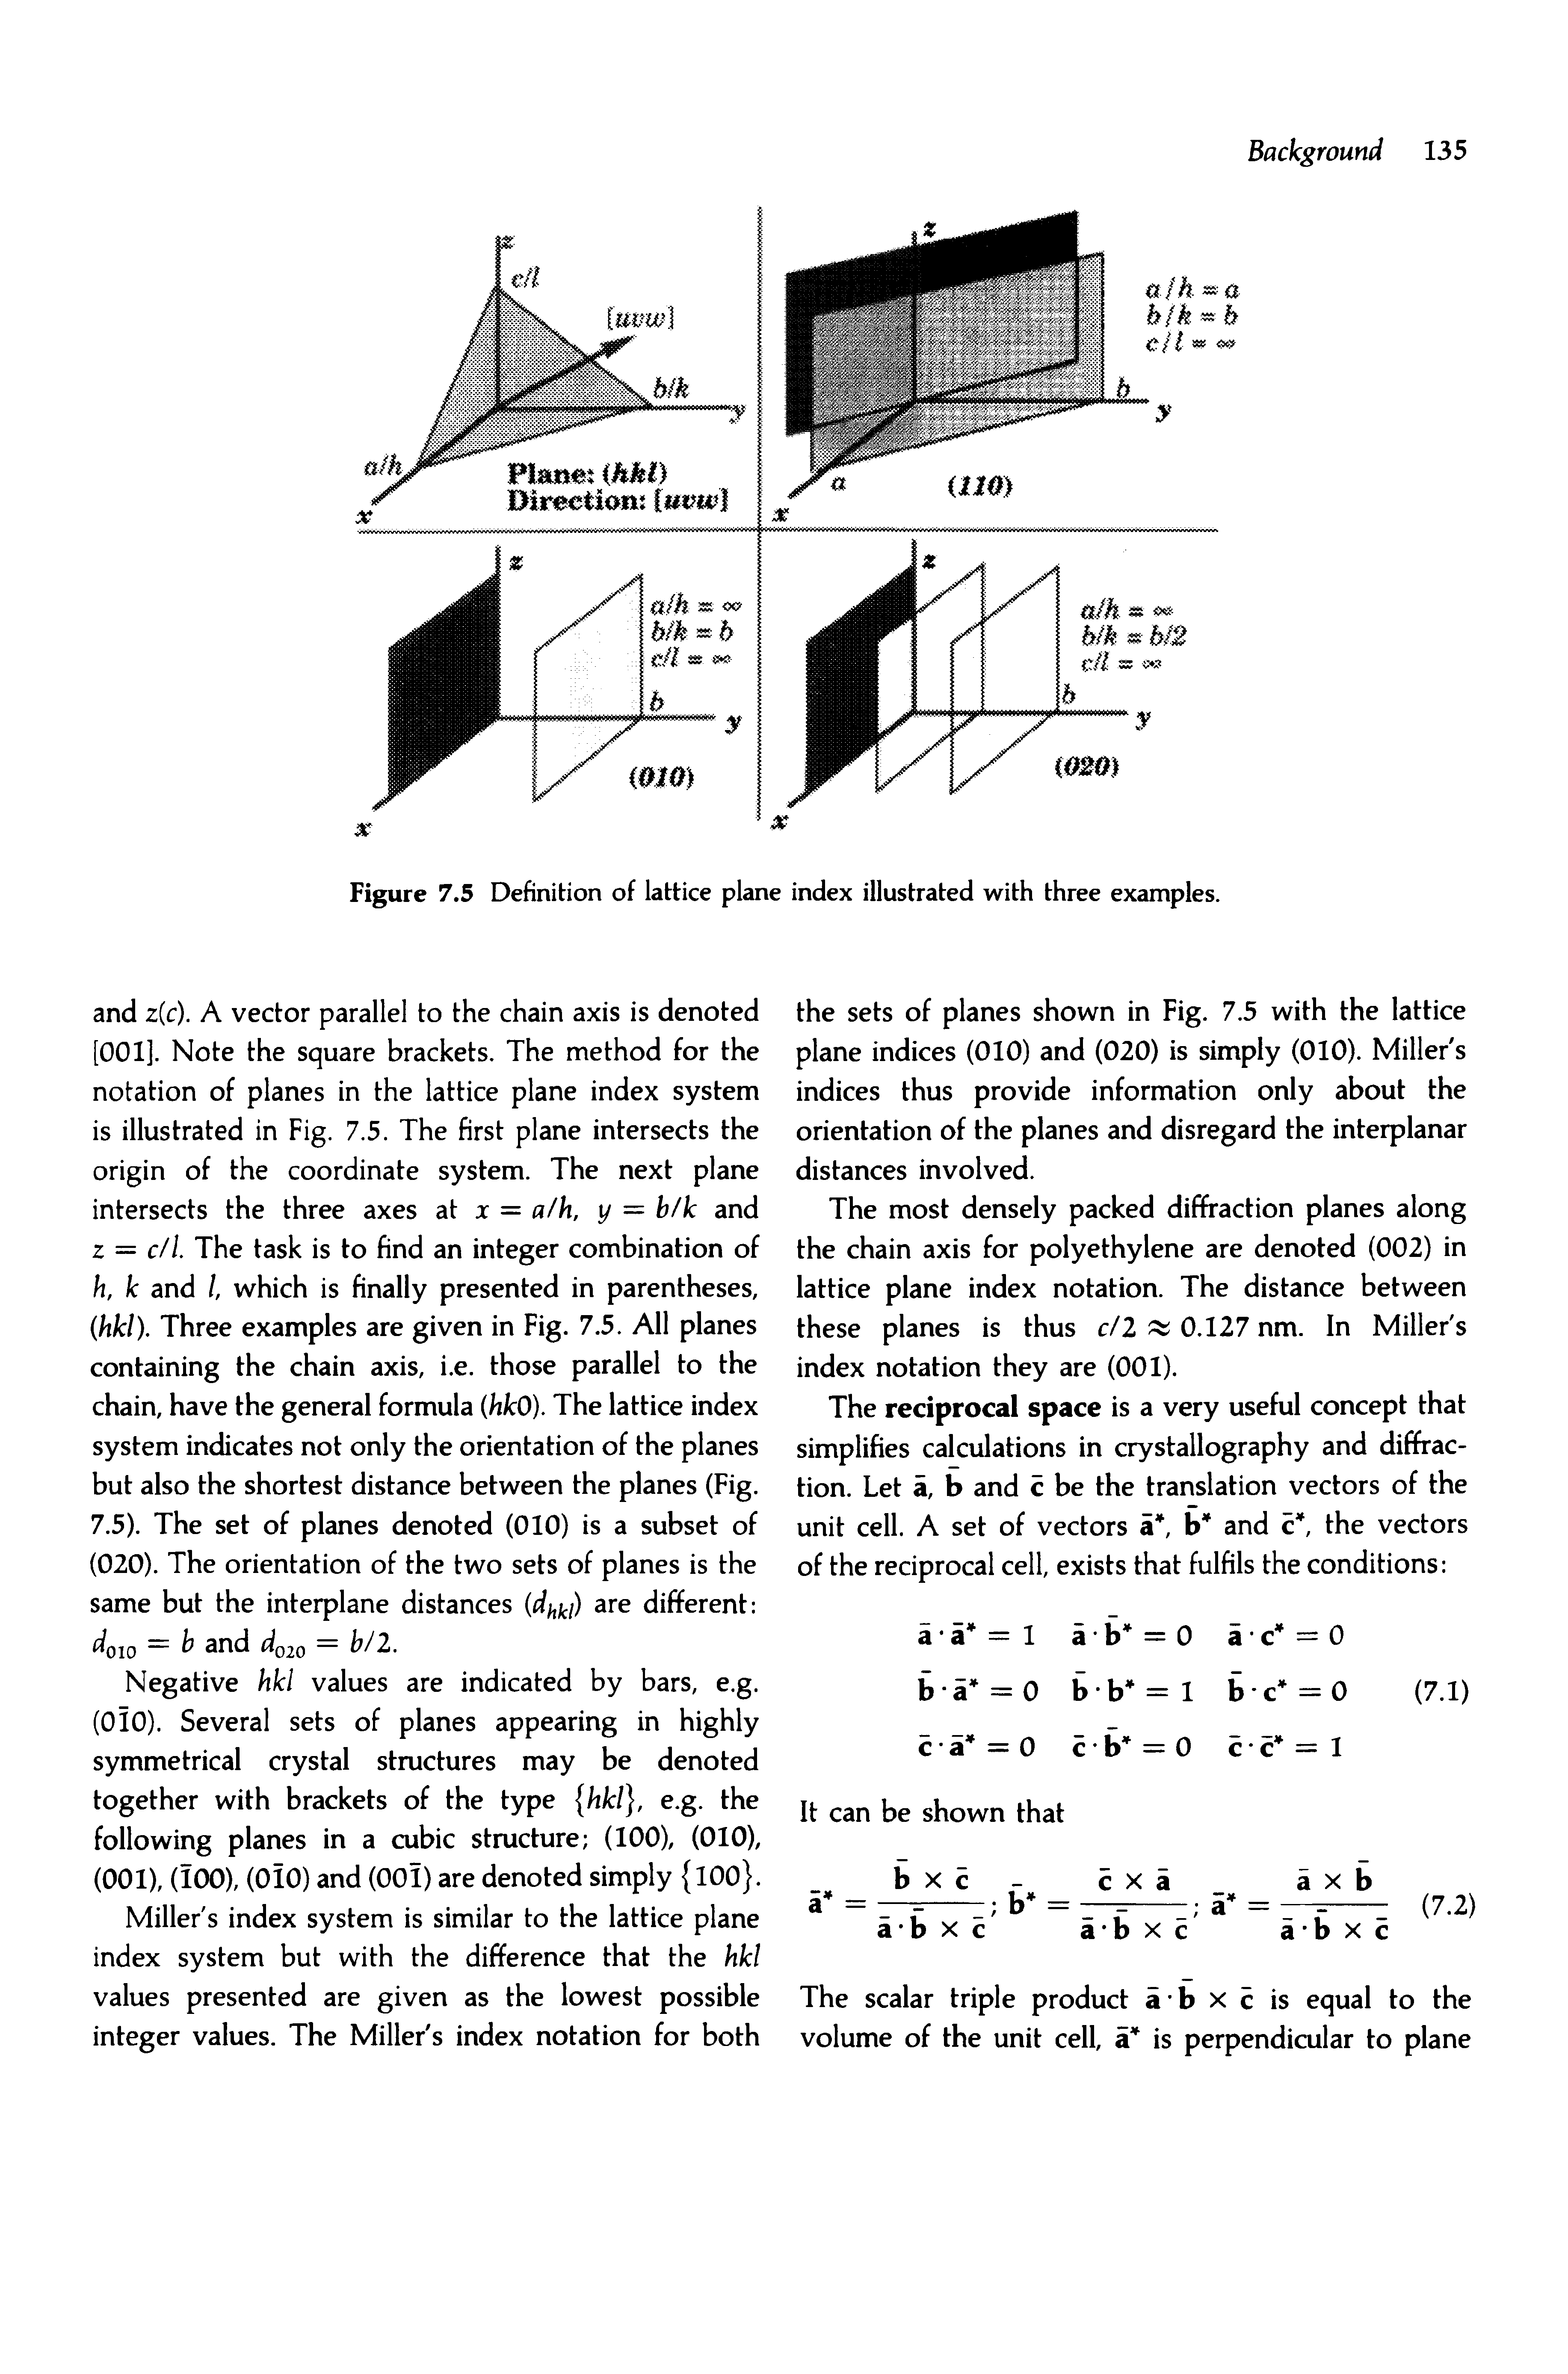 Figure 7.5 Definition of lattice plane index illustrated with three examples.